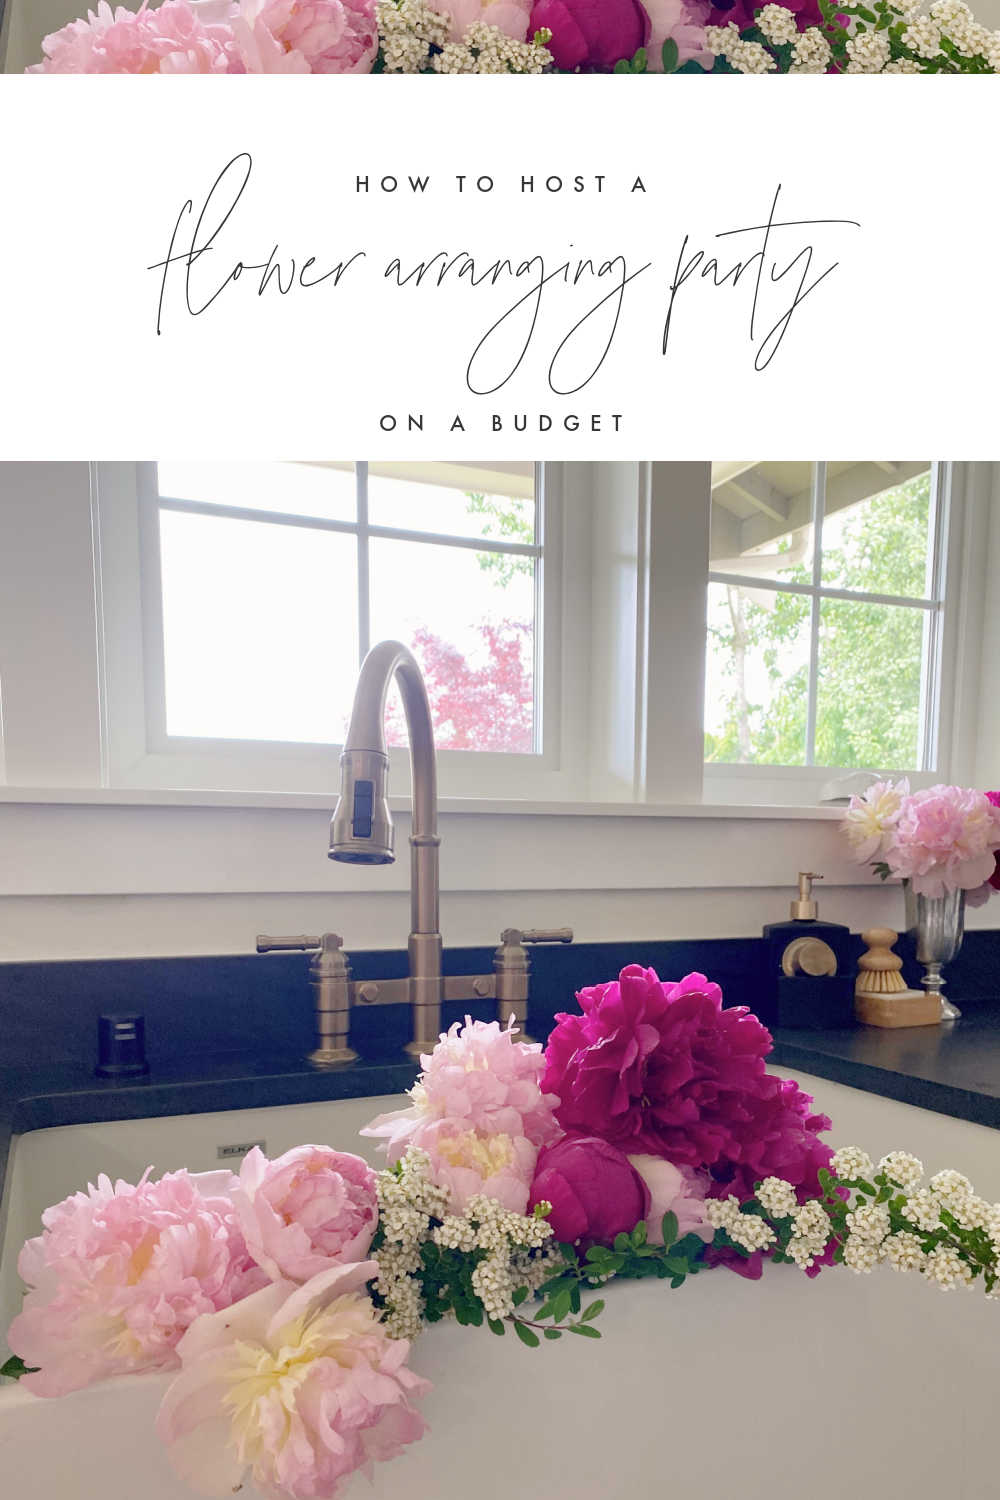 HOST A FLOWER ARRANGING PARTY ON A BUDGET